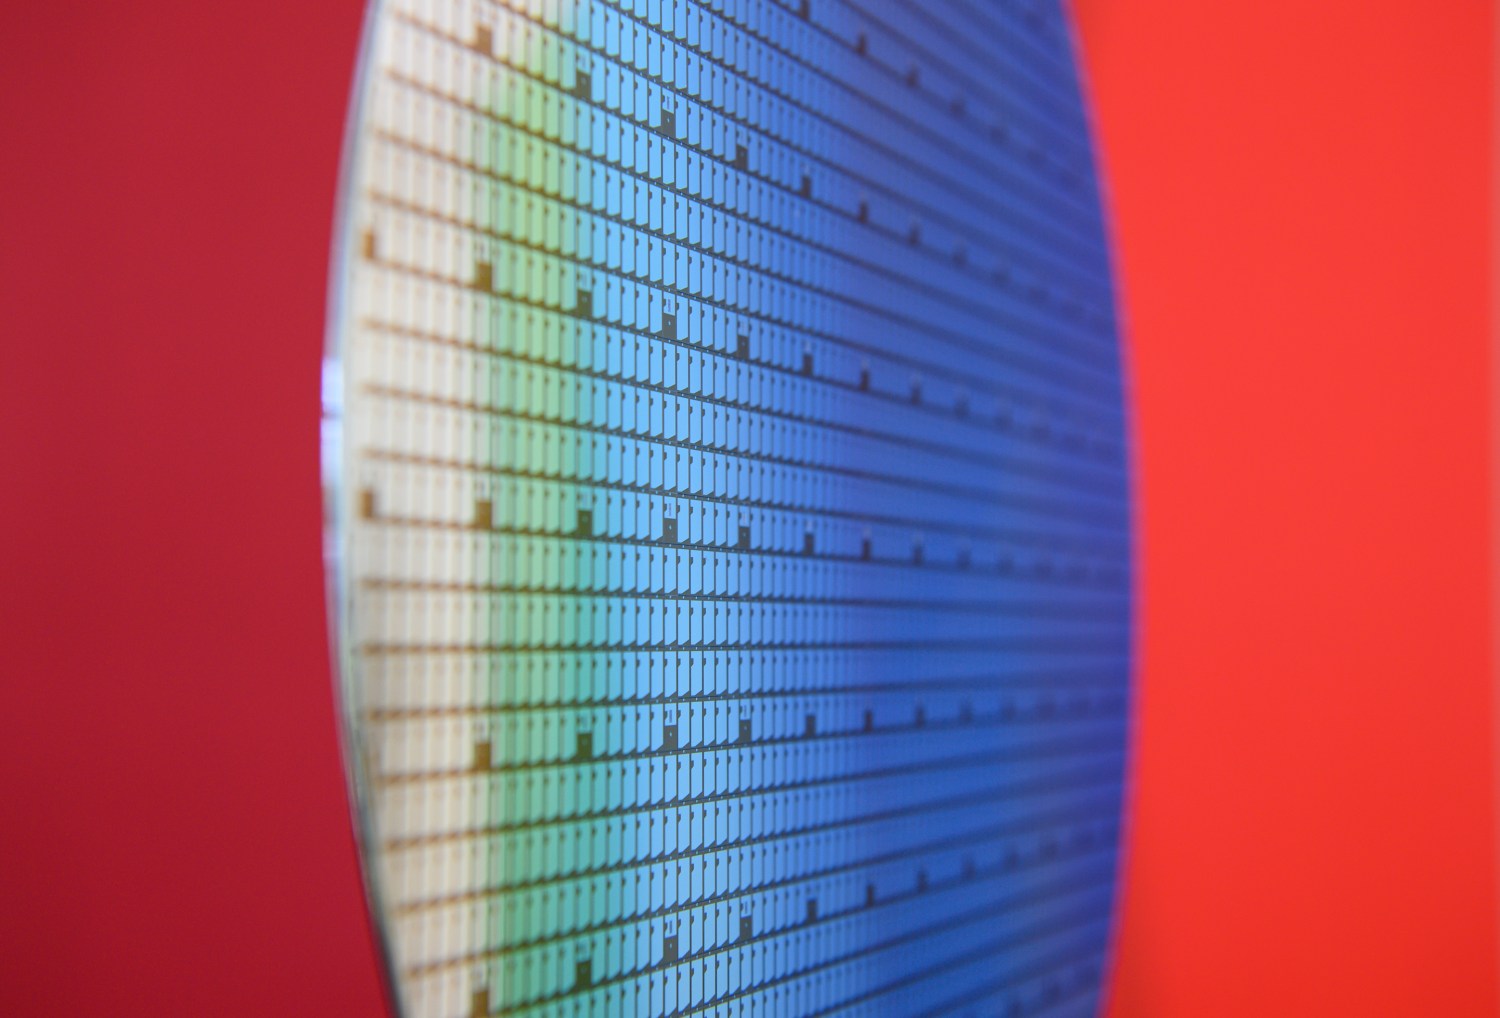 A 300-millimeter wafer is on display in the foyer during a press tour of Bosch's new semiconductor factory. The chip factory will officially go into operation on June 7, 2021.